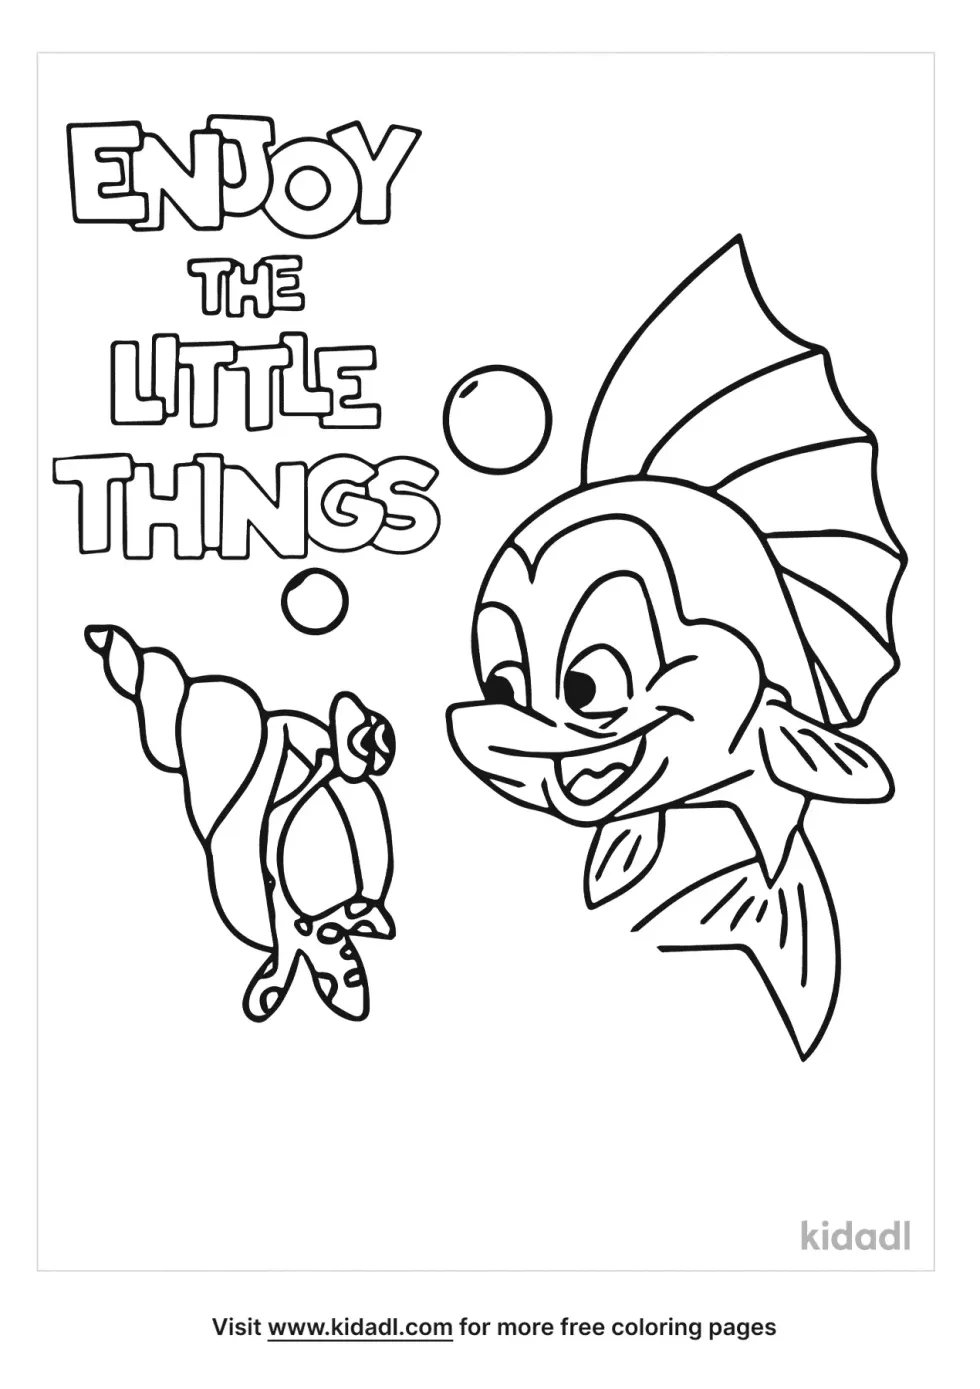 Enjoy The Little Things Coloring Page